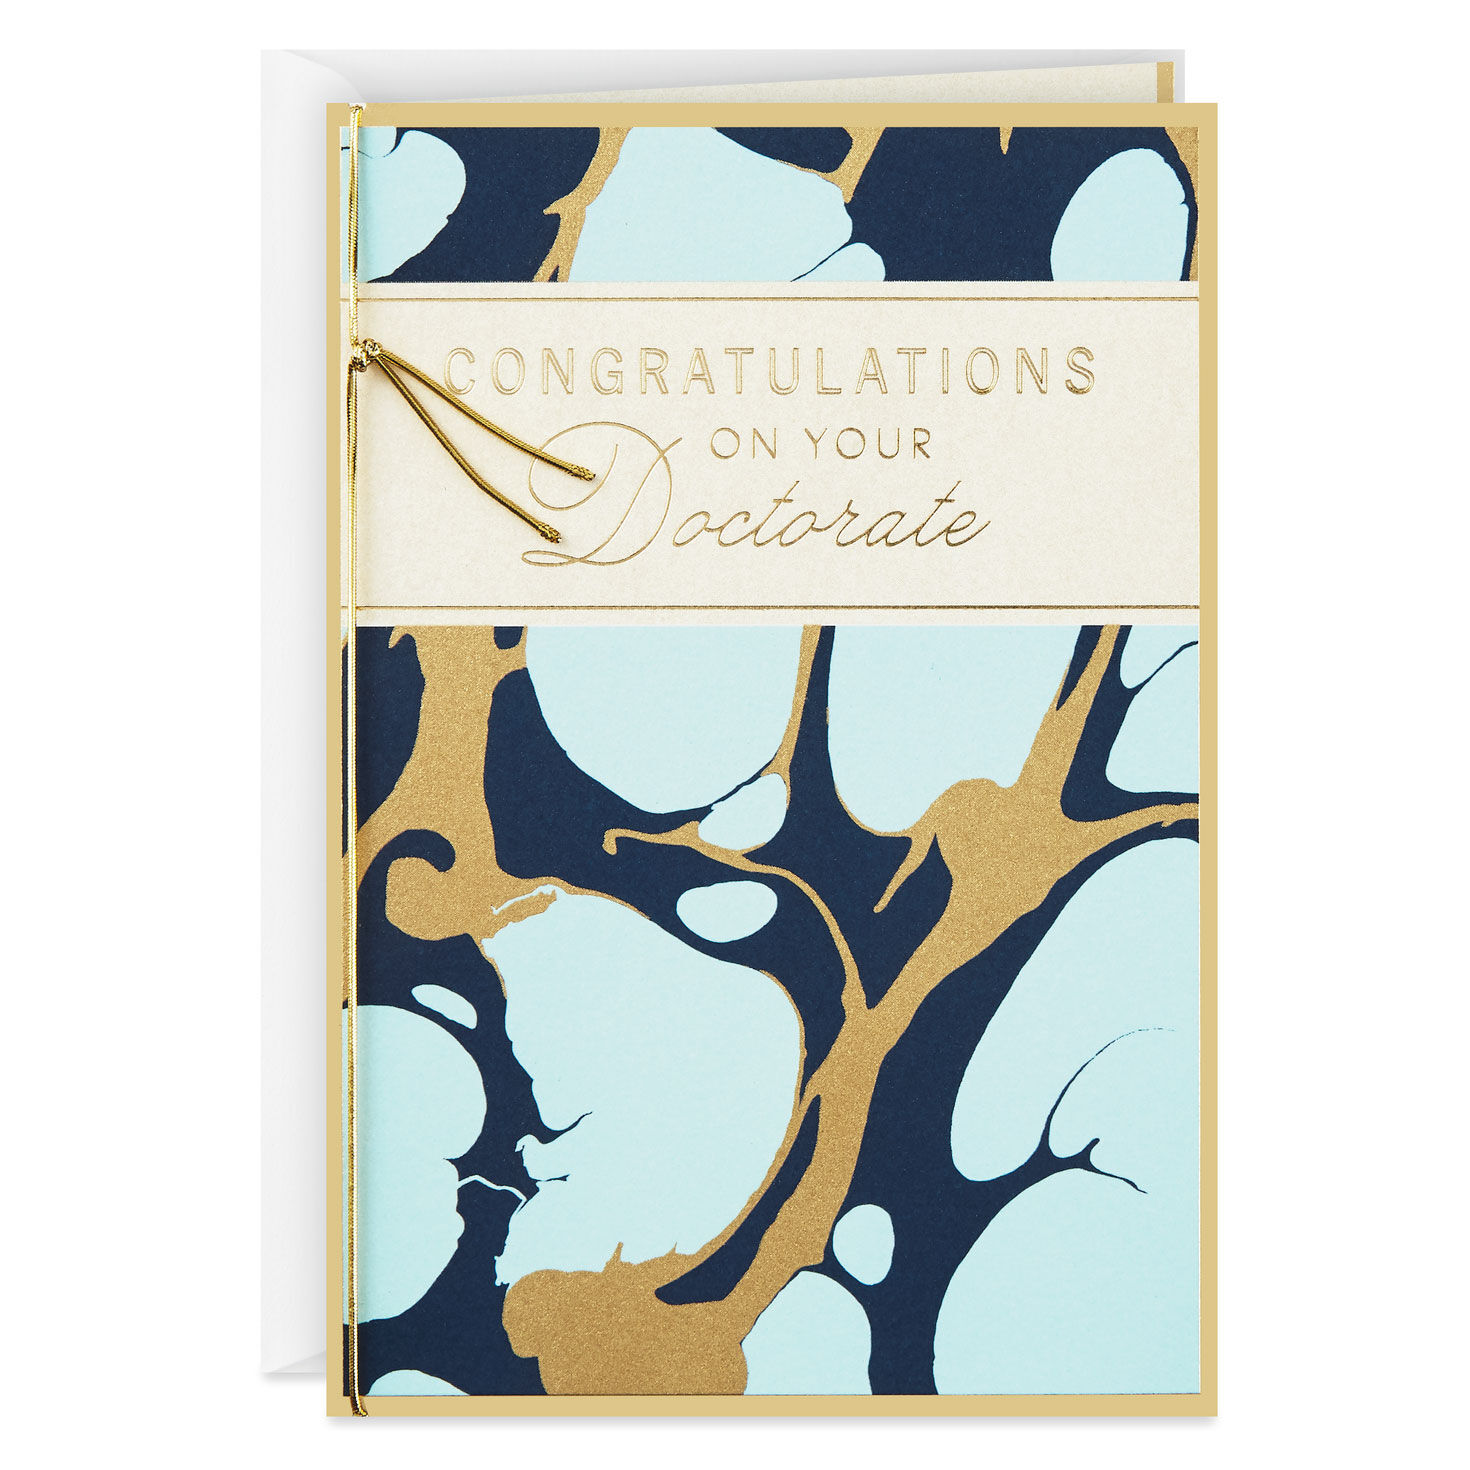 NEW Doctoral Degree Graduation Greeting Card & Envelope for ANYONE by Hallmark 